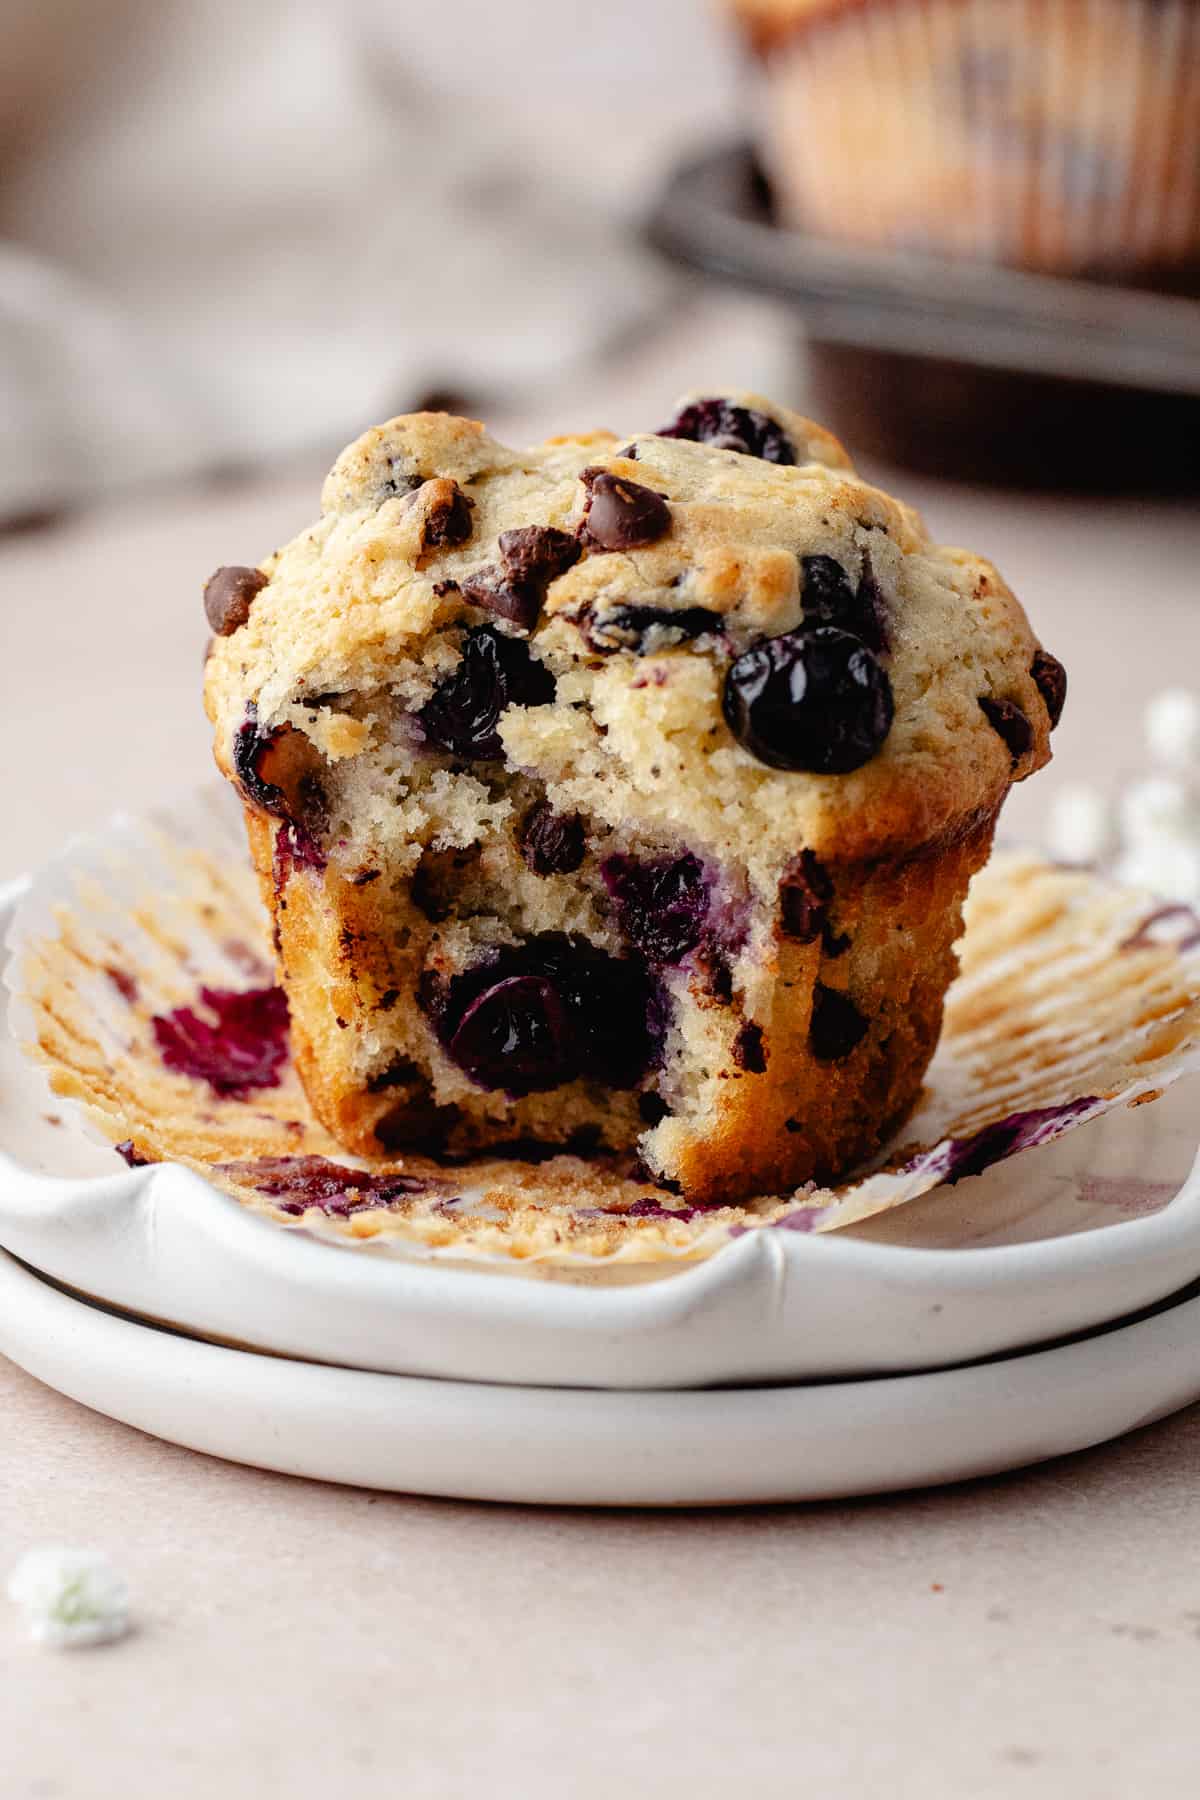 Blueberry chocolate chip muffins with a bite taken out of it.